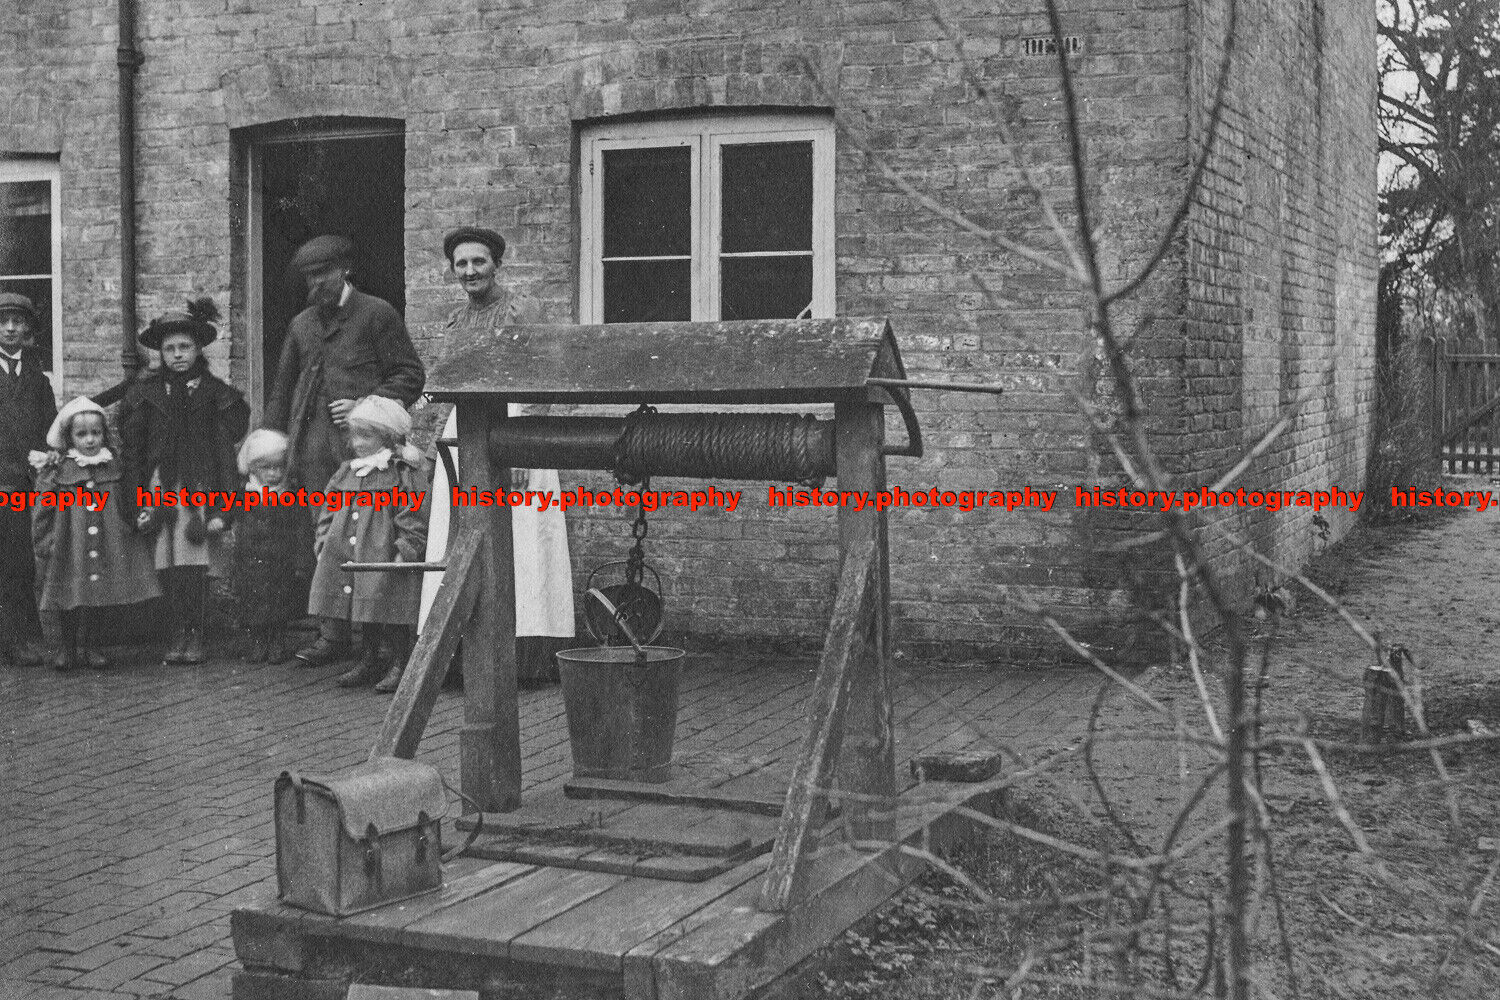 F000859 Photo of family outside house with well and bucket. c1900s. Image shot 1